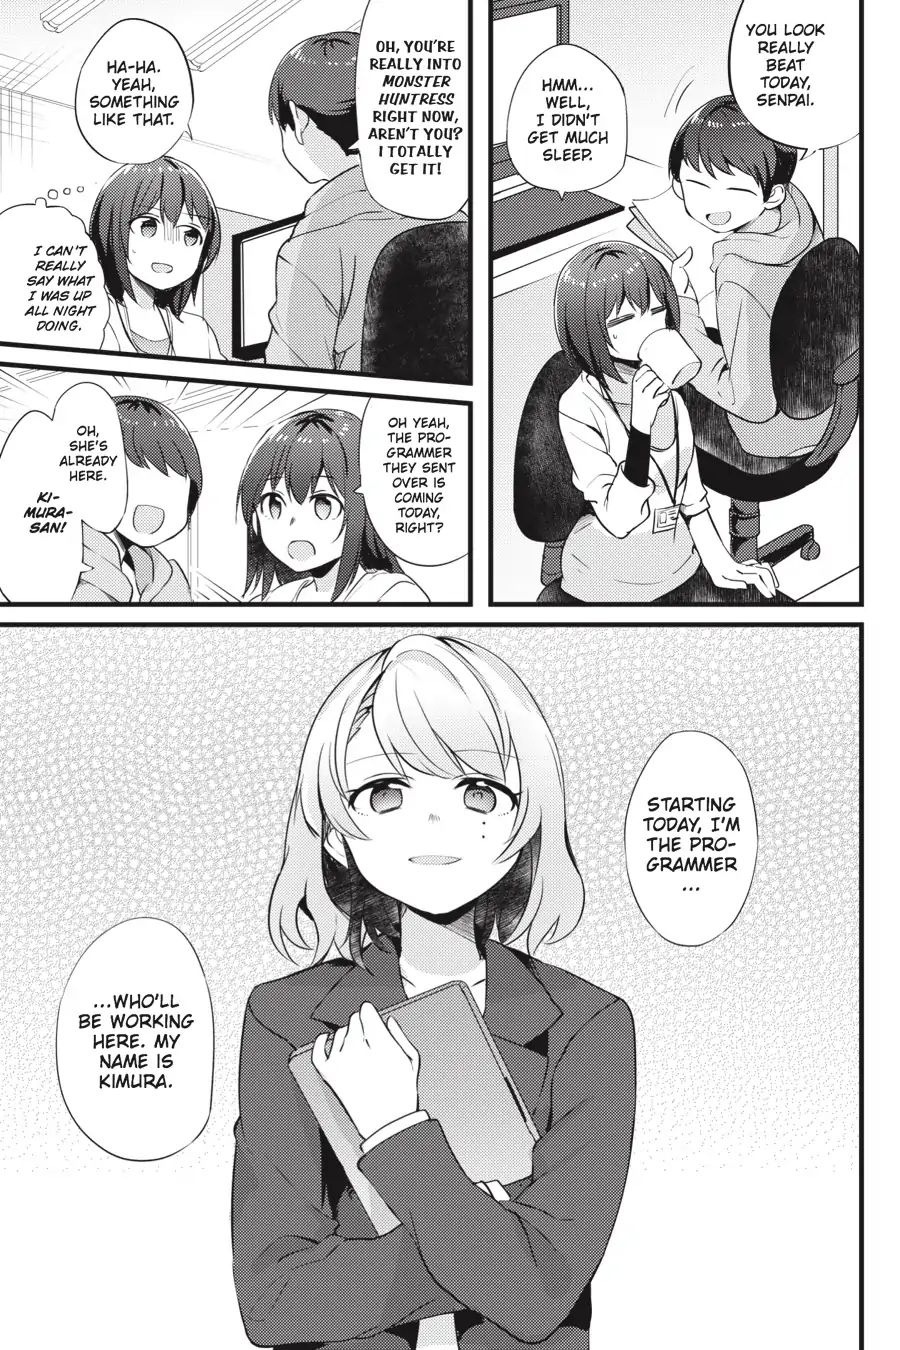 Every Time We Meet Eye To Eye, I Fall In Love With Her Vol.1 Chapter: Mikan Uji - The Women At A Certain Company - Picture 3